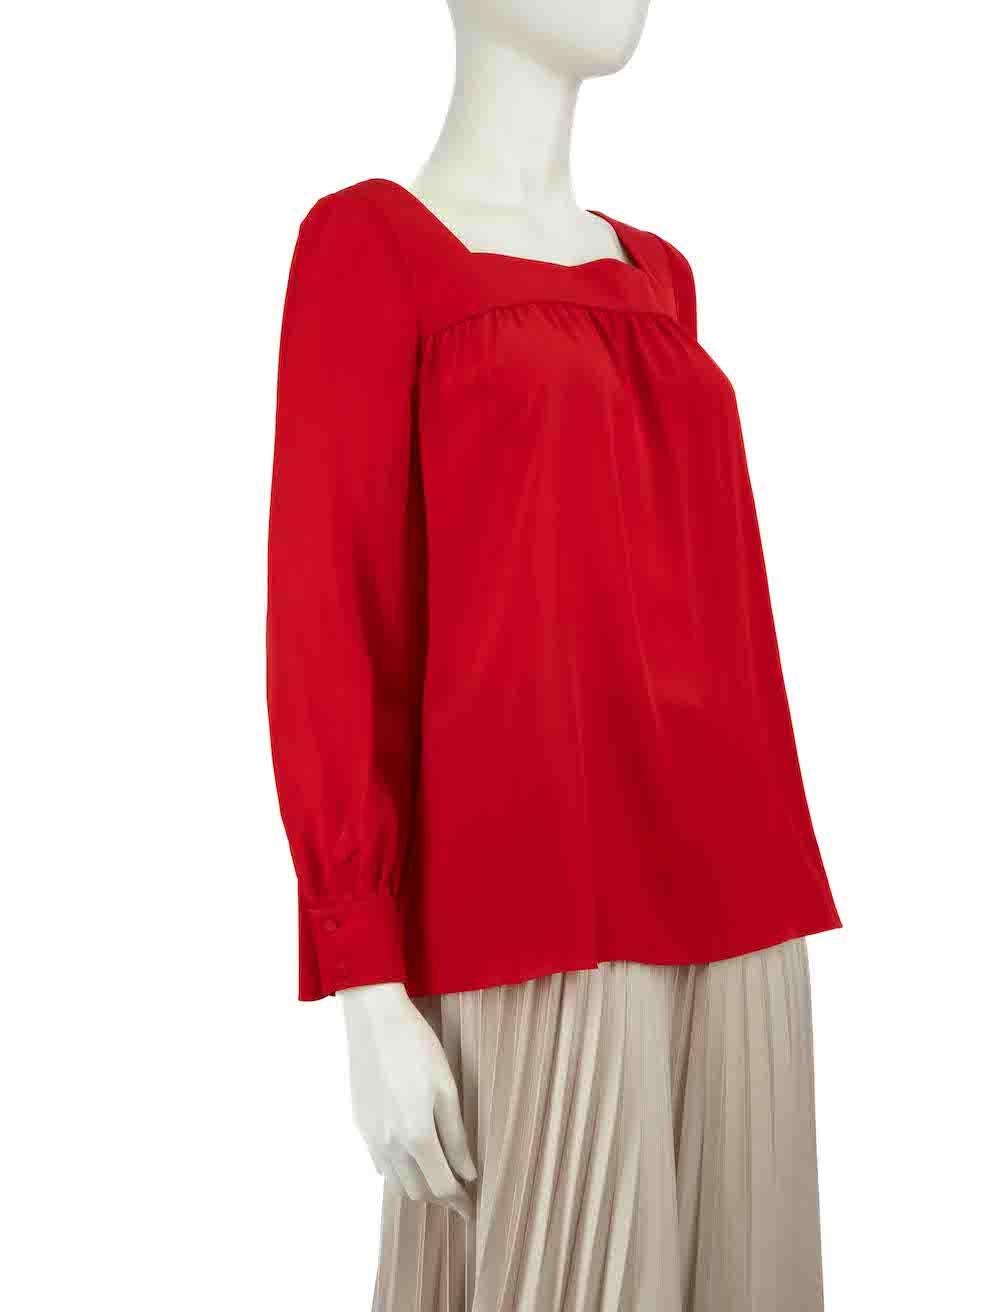 CONDITION is Good. General wear to the blouse is evident. Moderate signs of wear to the front with discoloured marks on this used Saint Laurent designer resale item.
 
Details
Red
Silk
Blouse
Square neck
Gathered detail
Long puff sleeves
Buttoned